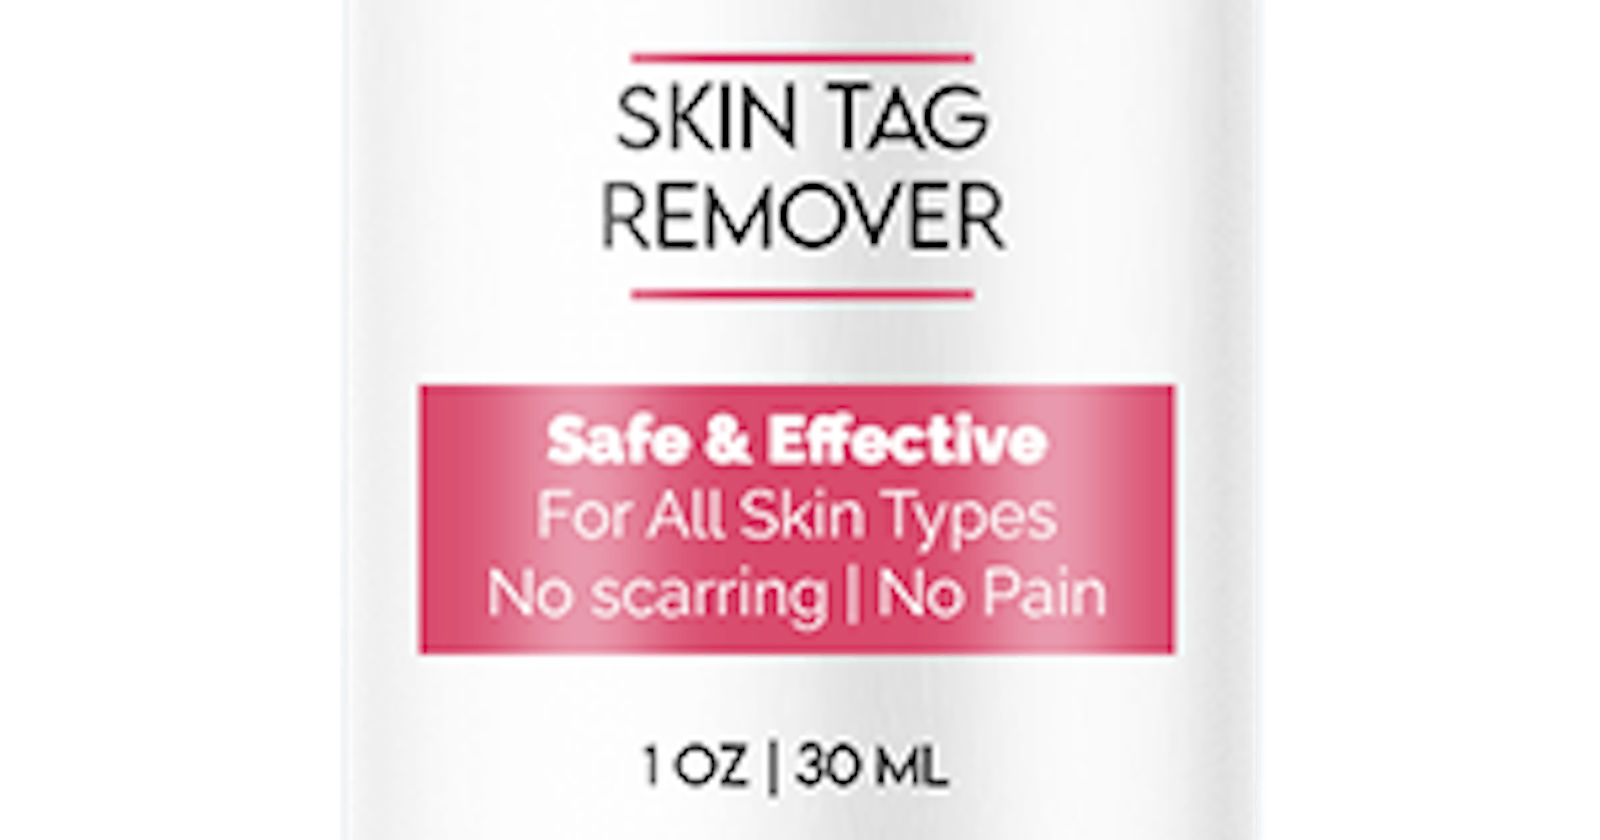 https://www.mid-day.com/brand-media/article/nuvei-skin-tag-remover-canada-reviews-perfect-10-skin-tag-remover-canada-23283477